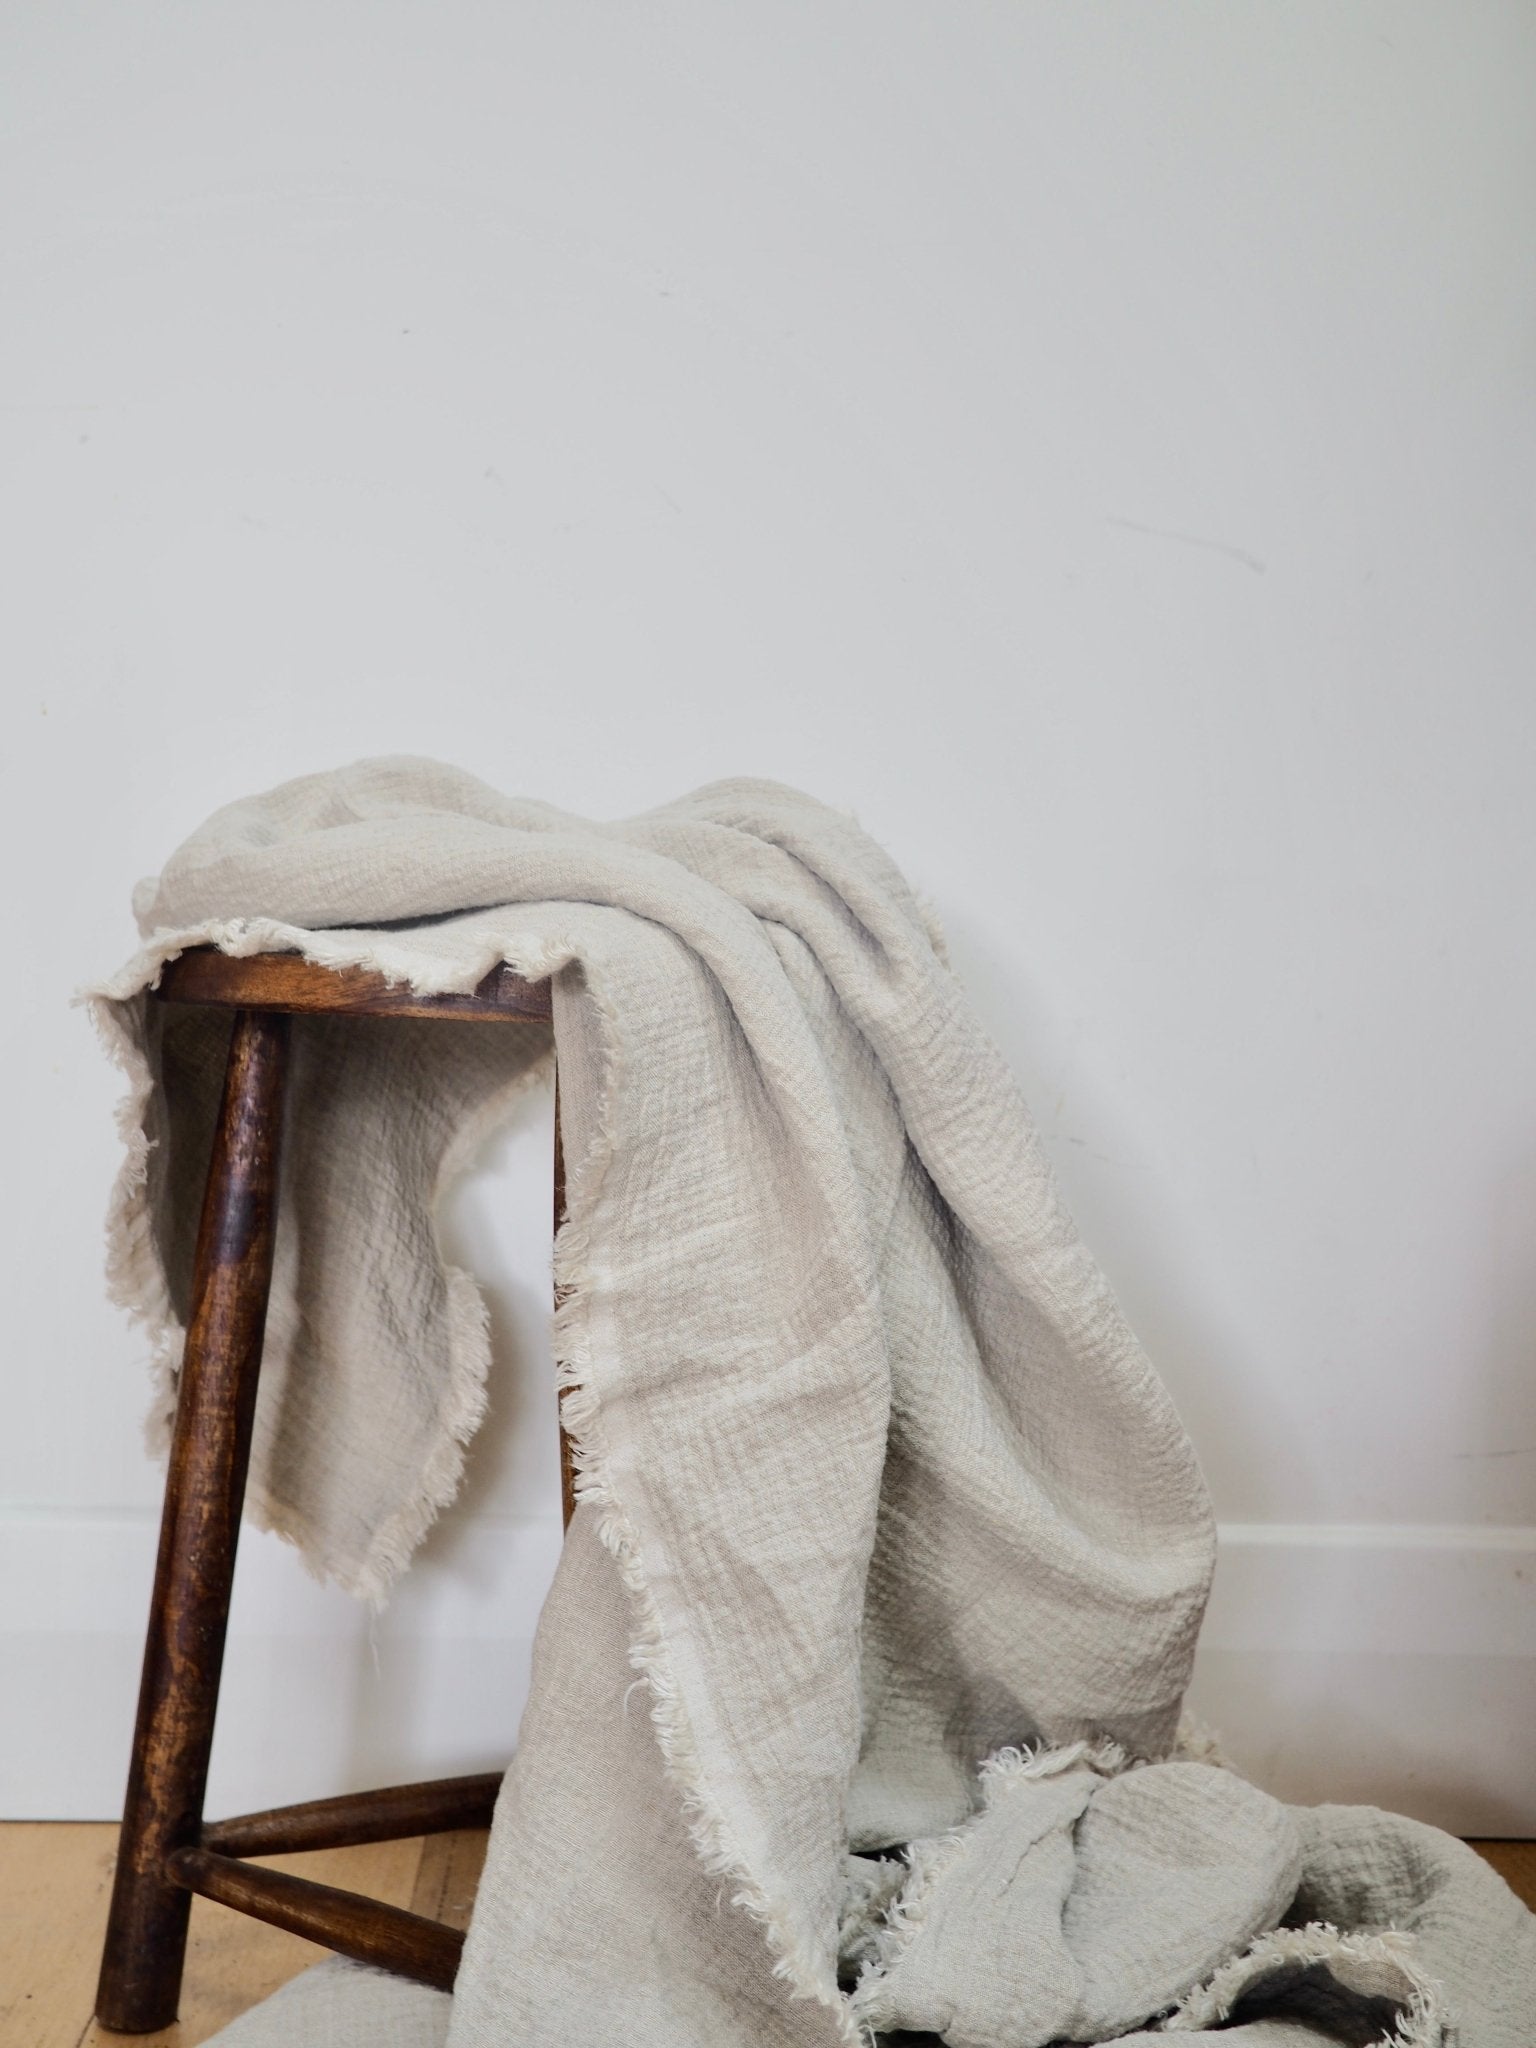 Heavyweight linen blanket in natural colour flowing from a rustic stool to show its large length and fringed detailing.